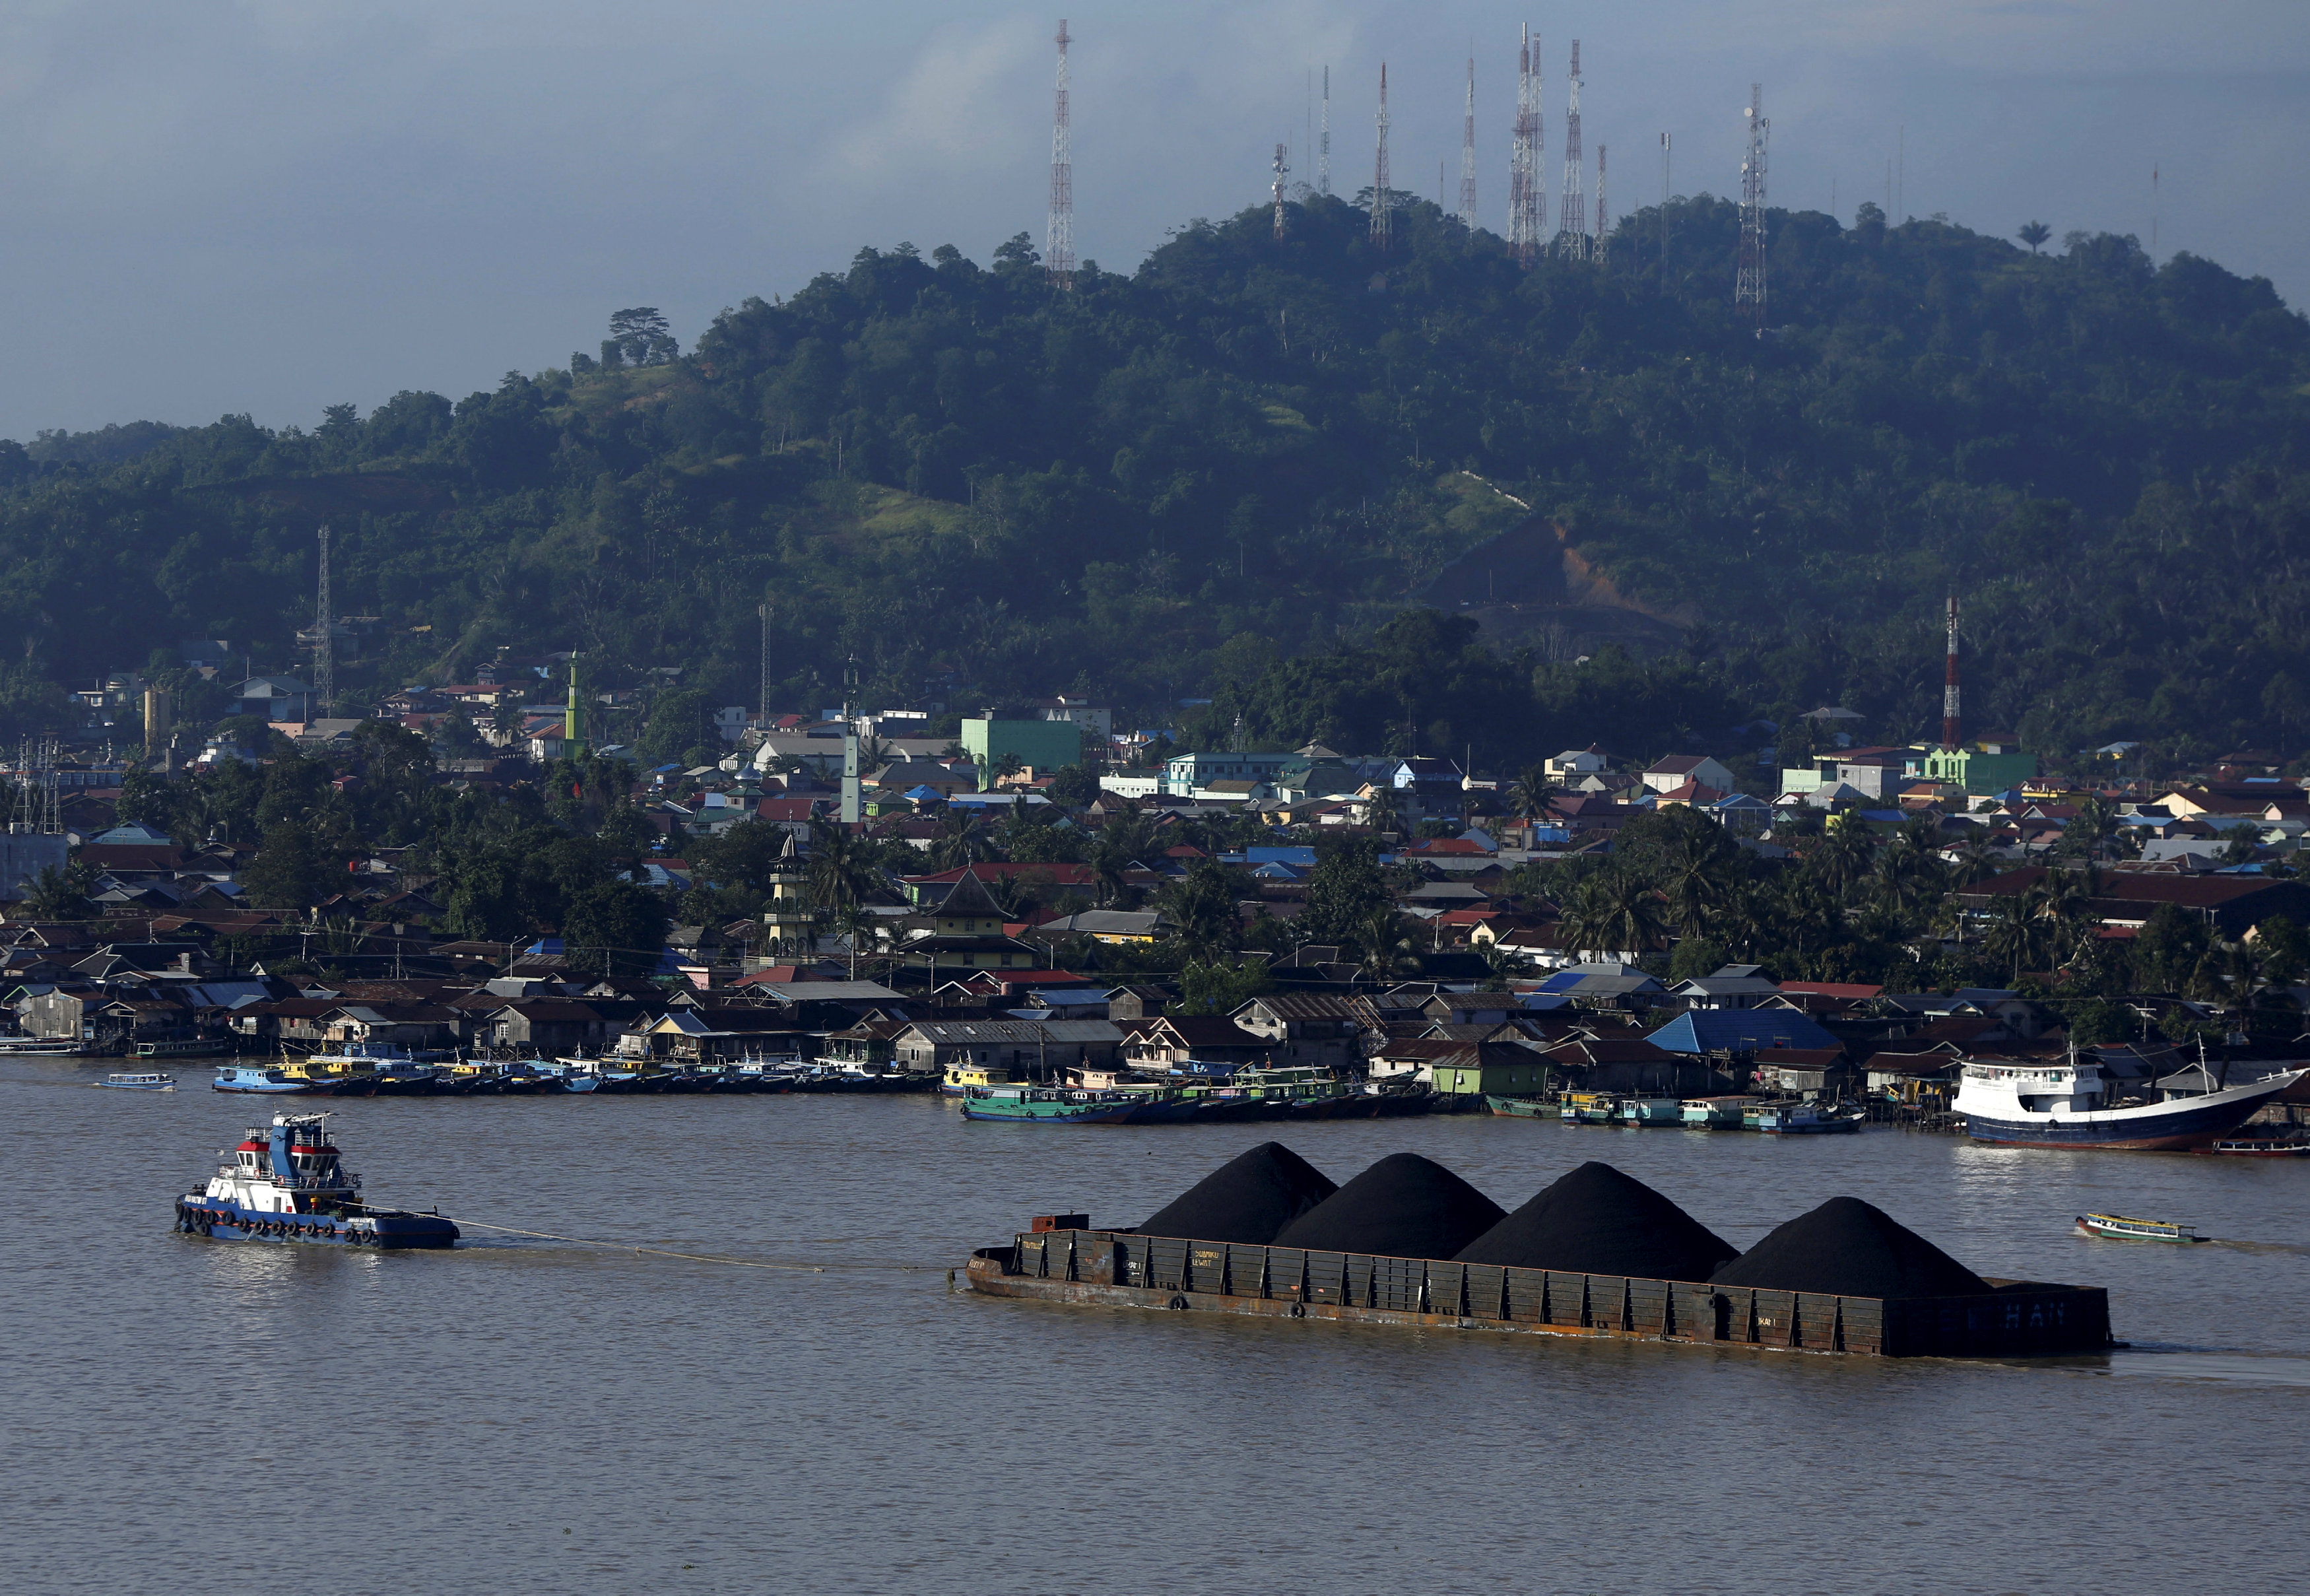 Indonesia: Coal on hold for Philippines after 7 sailors abducted